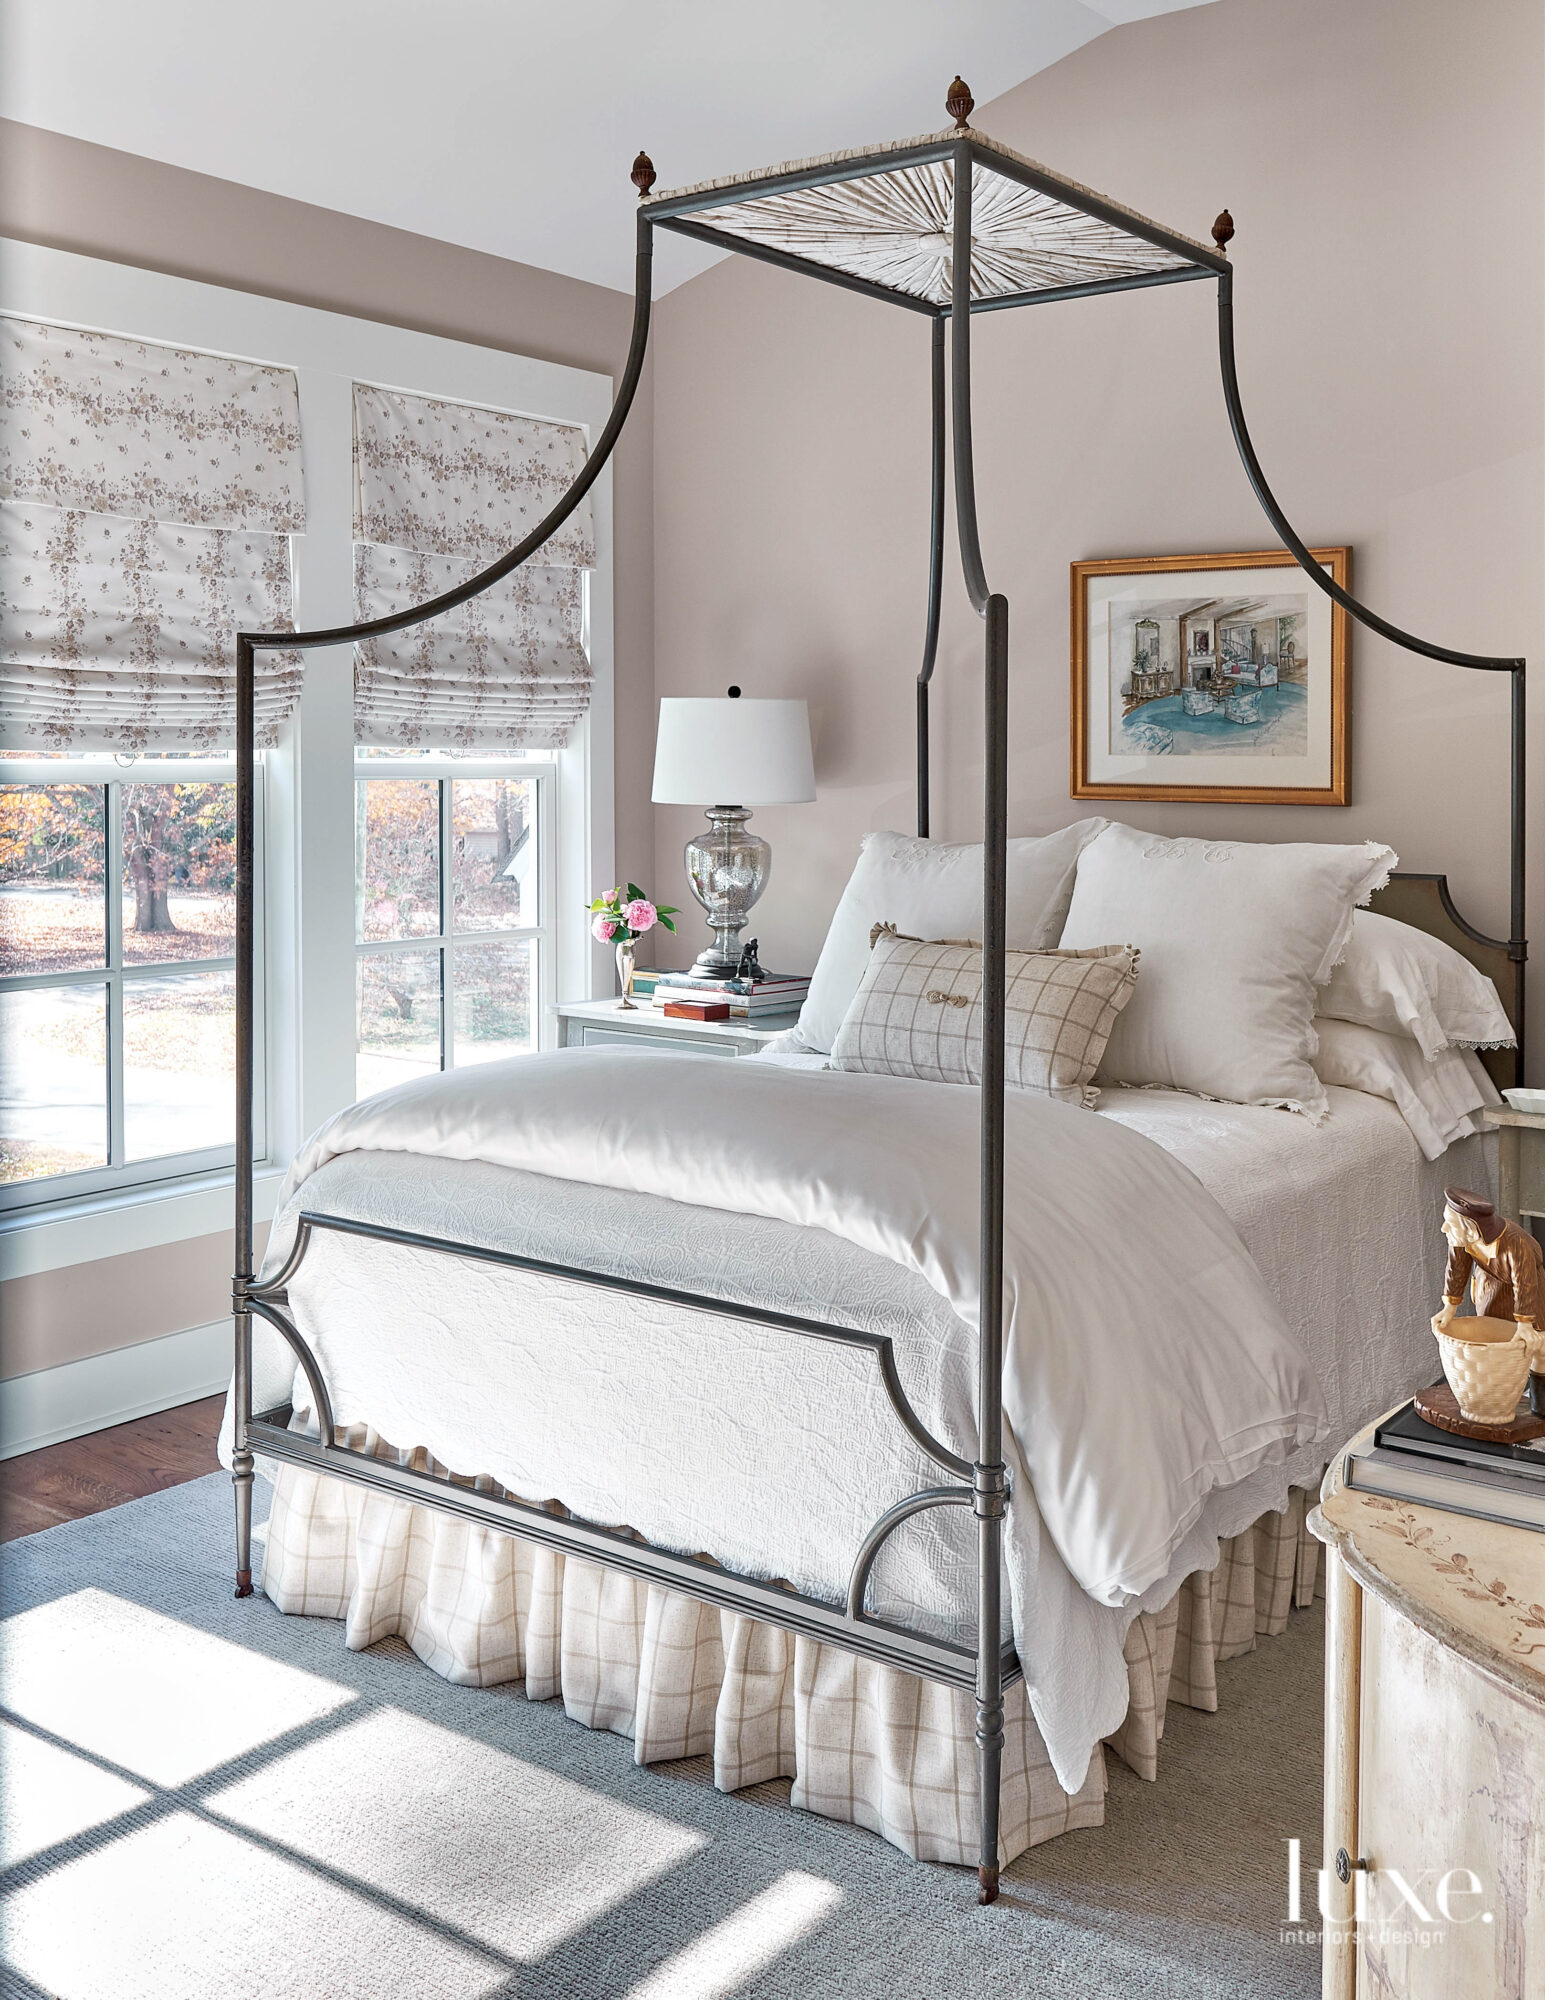 Bedroom with light neutral walls, iron canopy bed and gathered bed skirt